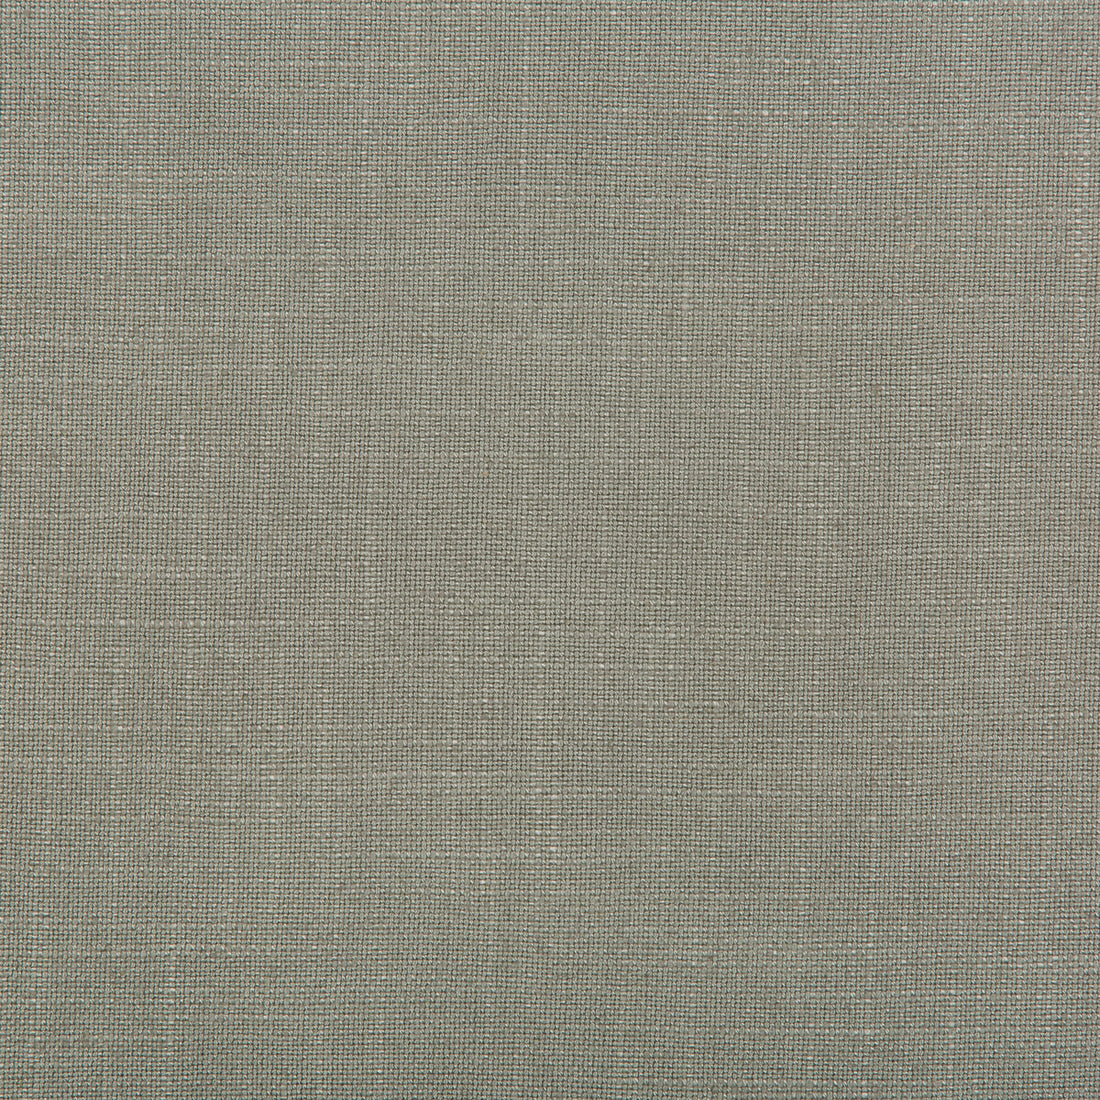 Aura fabric in seal color - pattern 35520.2121.0 - by Kravet Design